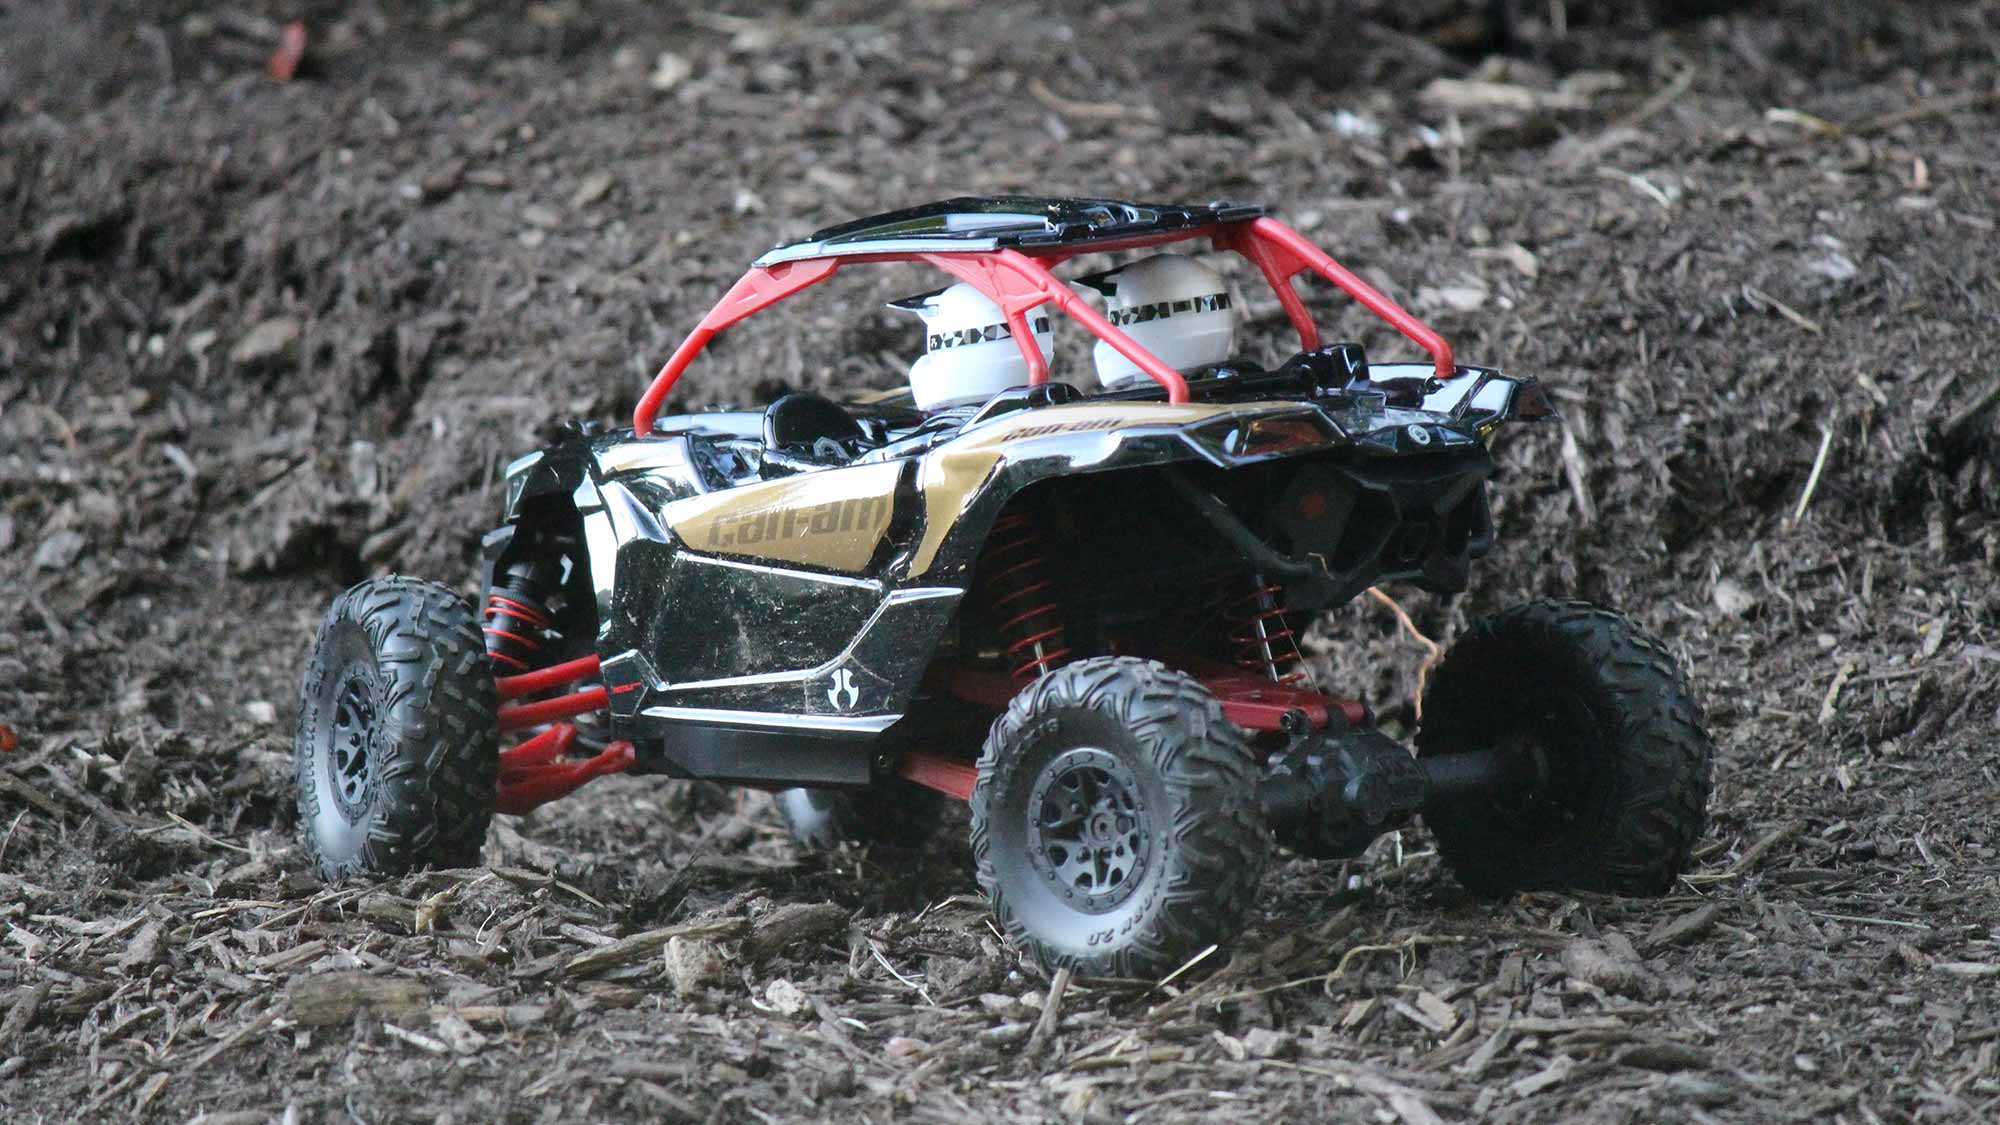 Axial Adventure - The Can-Am Off-Road Yeti Jr is not just